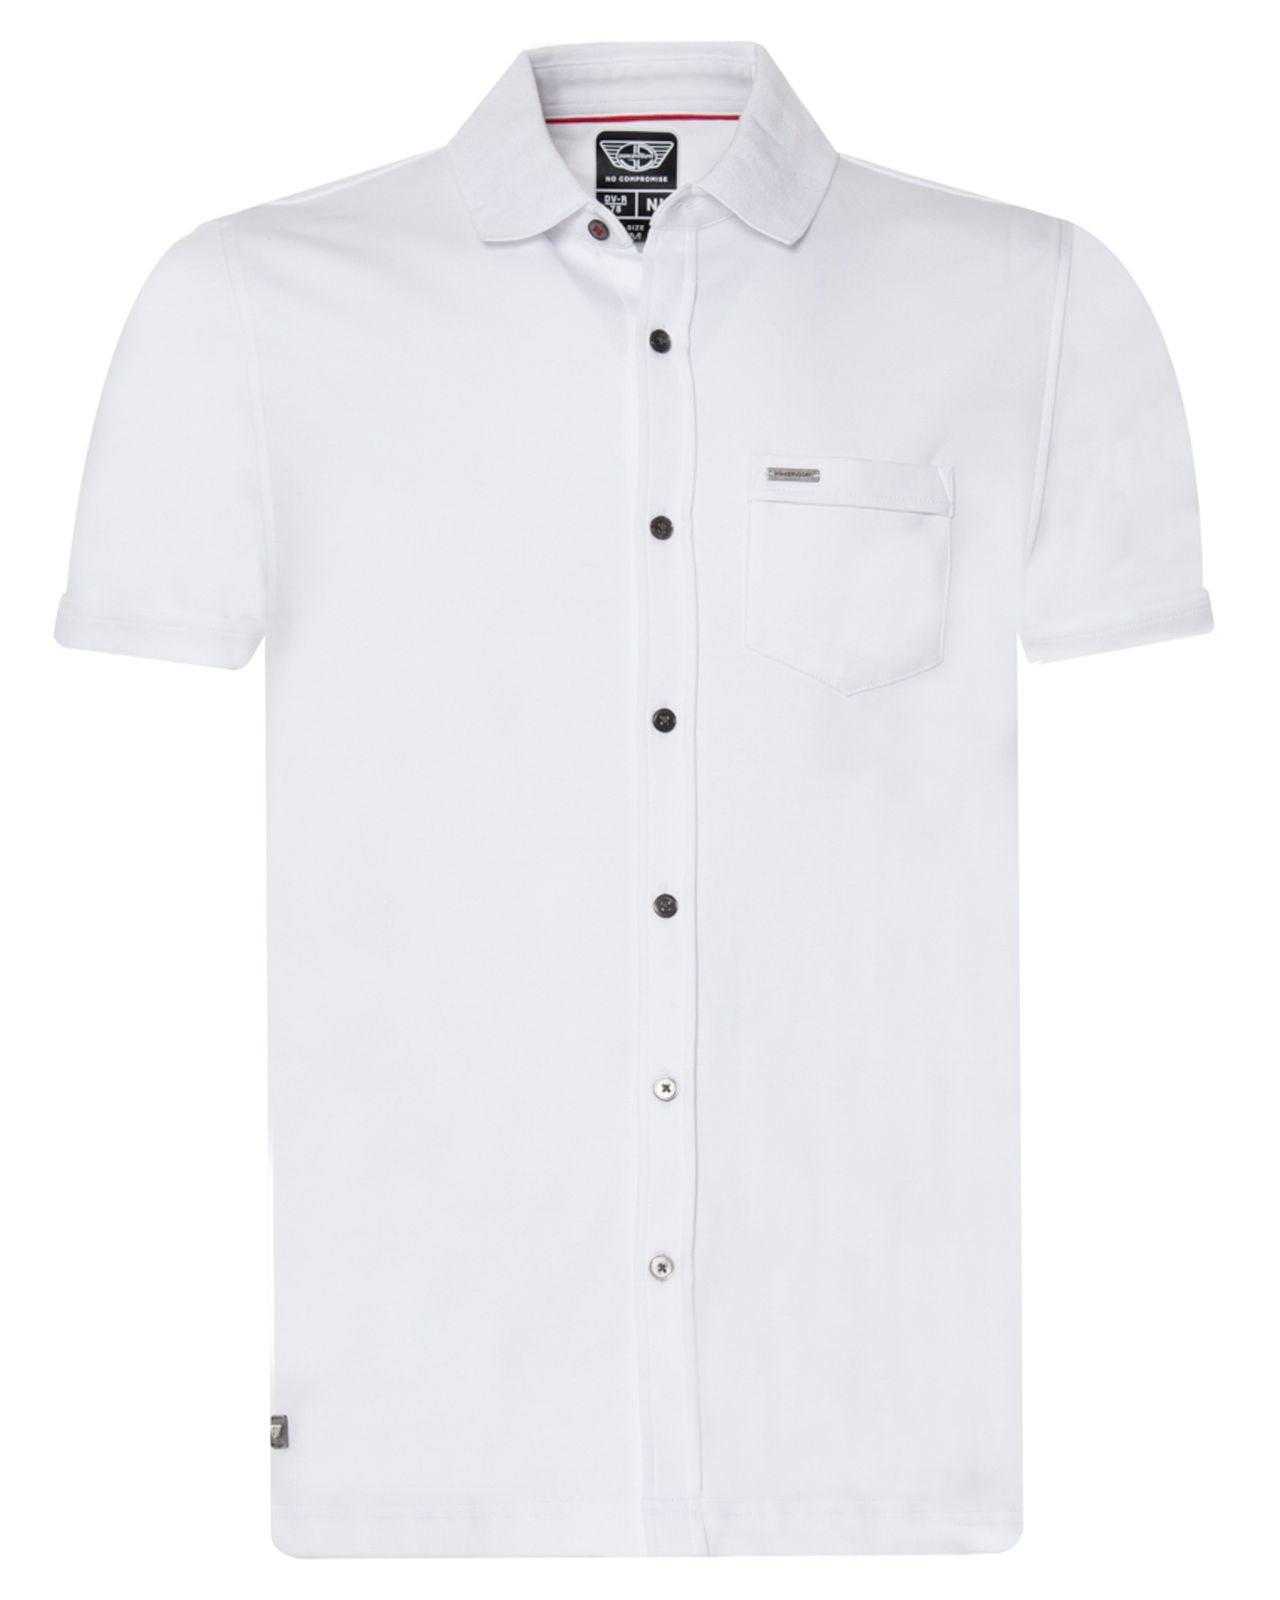 Donkervoort Polo KM - White